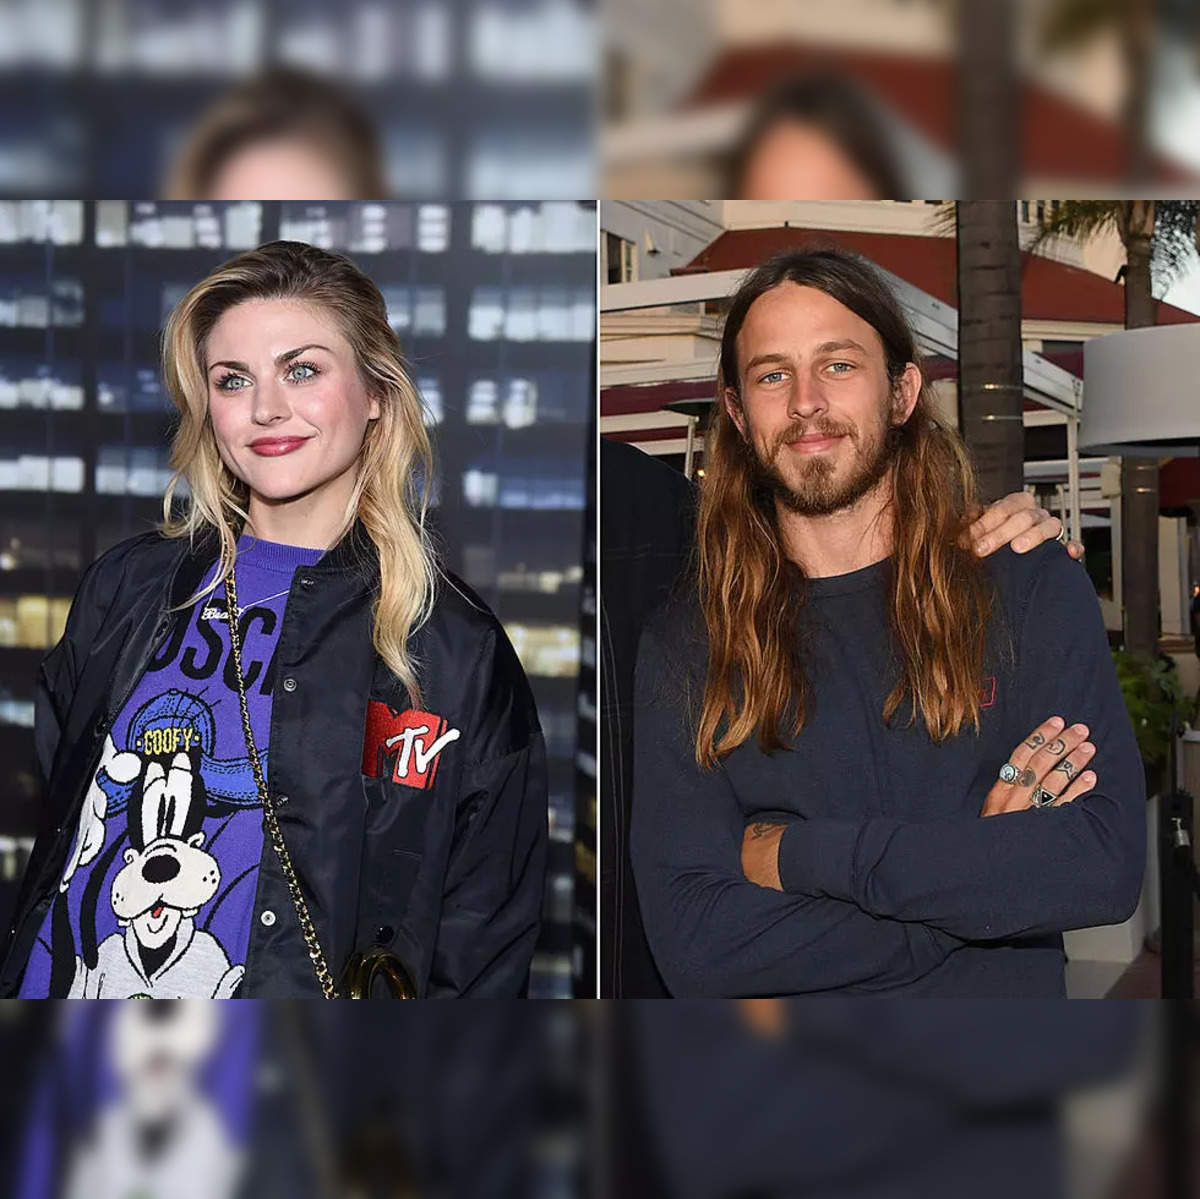 Frances Bean Cobain and Riley Hawk got married: More details on